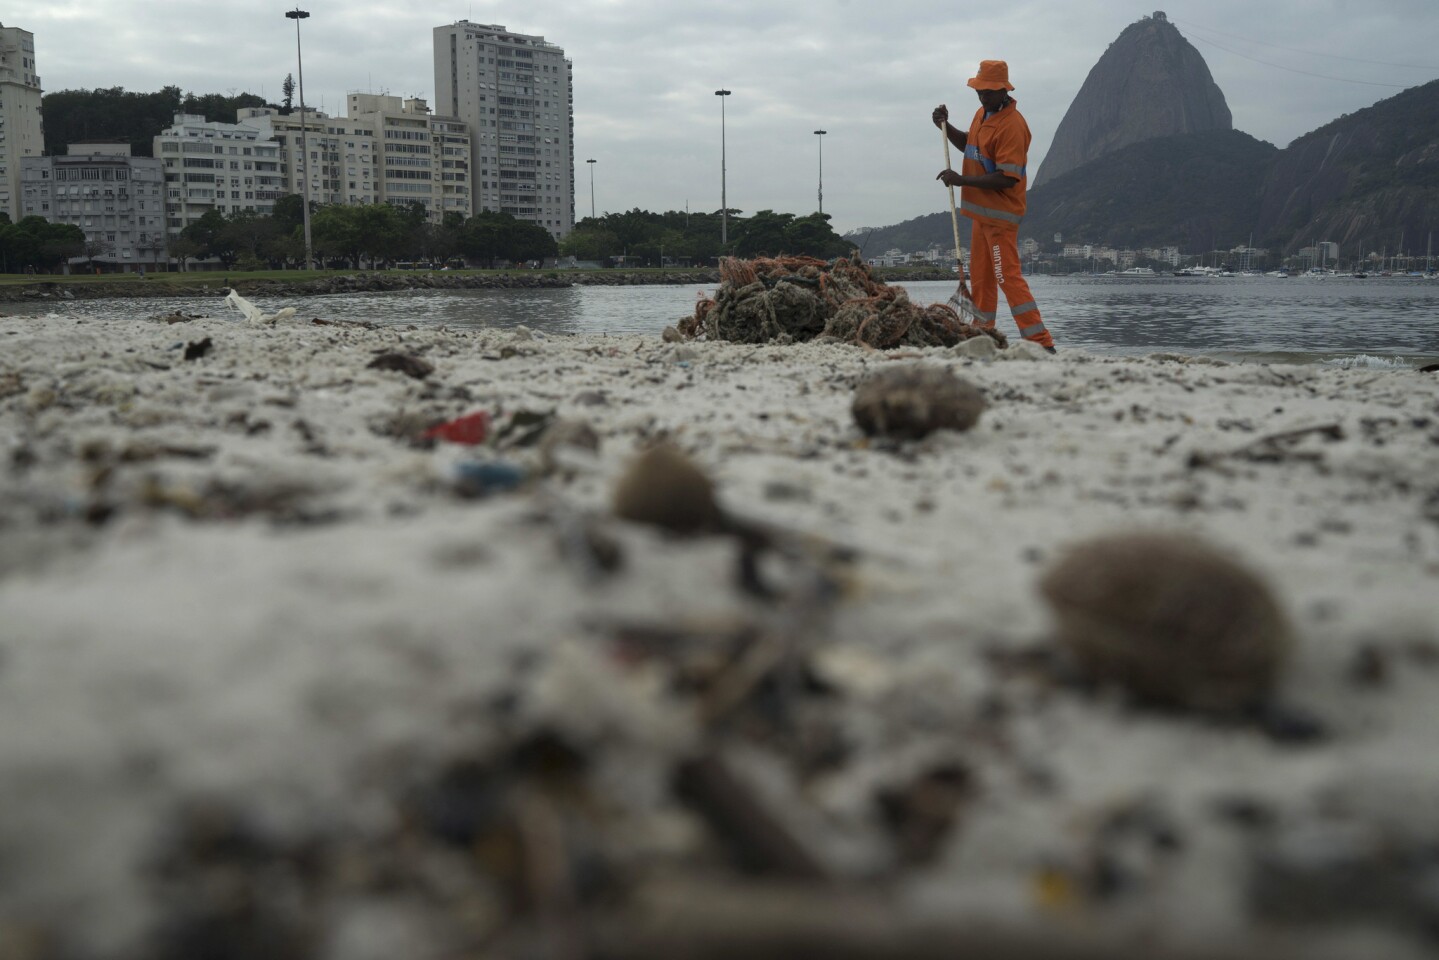 A worker removes trash from Botafogo beach next to the Sugarloaf Mountain and the Guanabara Bay in Rio de Janeiro. Just days ahead of the Olympic Games the waterways of Rio are as filthy as ever, contaminated with human sewage teeming with dangerous viruses and bacteria, according to a 16-month-long study commissioned by the Associated Press.